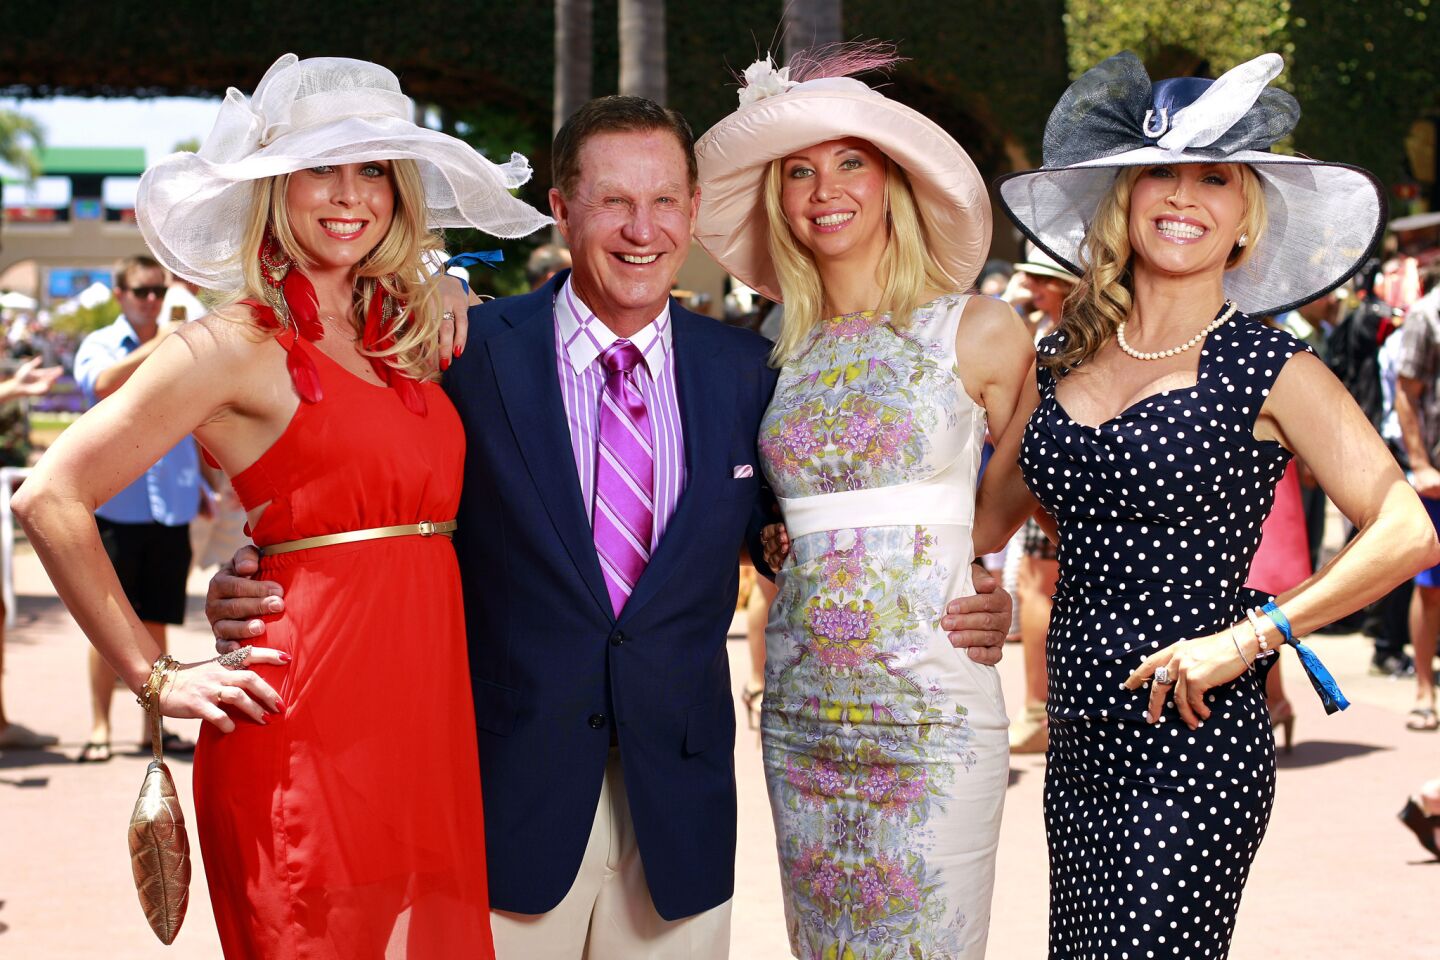 Then-owner Doug Manchester of the Union-Tribune at the Del Mar Thoroughbred Club with PR professional Stephanie Brown, wife-to-be Geniya Derzhaving and U-T TV anchor Taylor Baldwin in 2013.